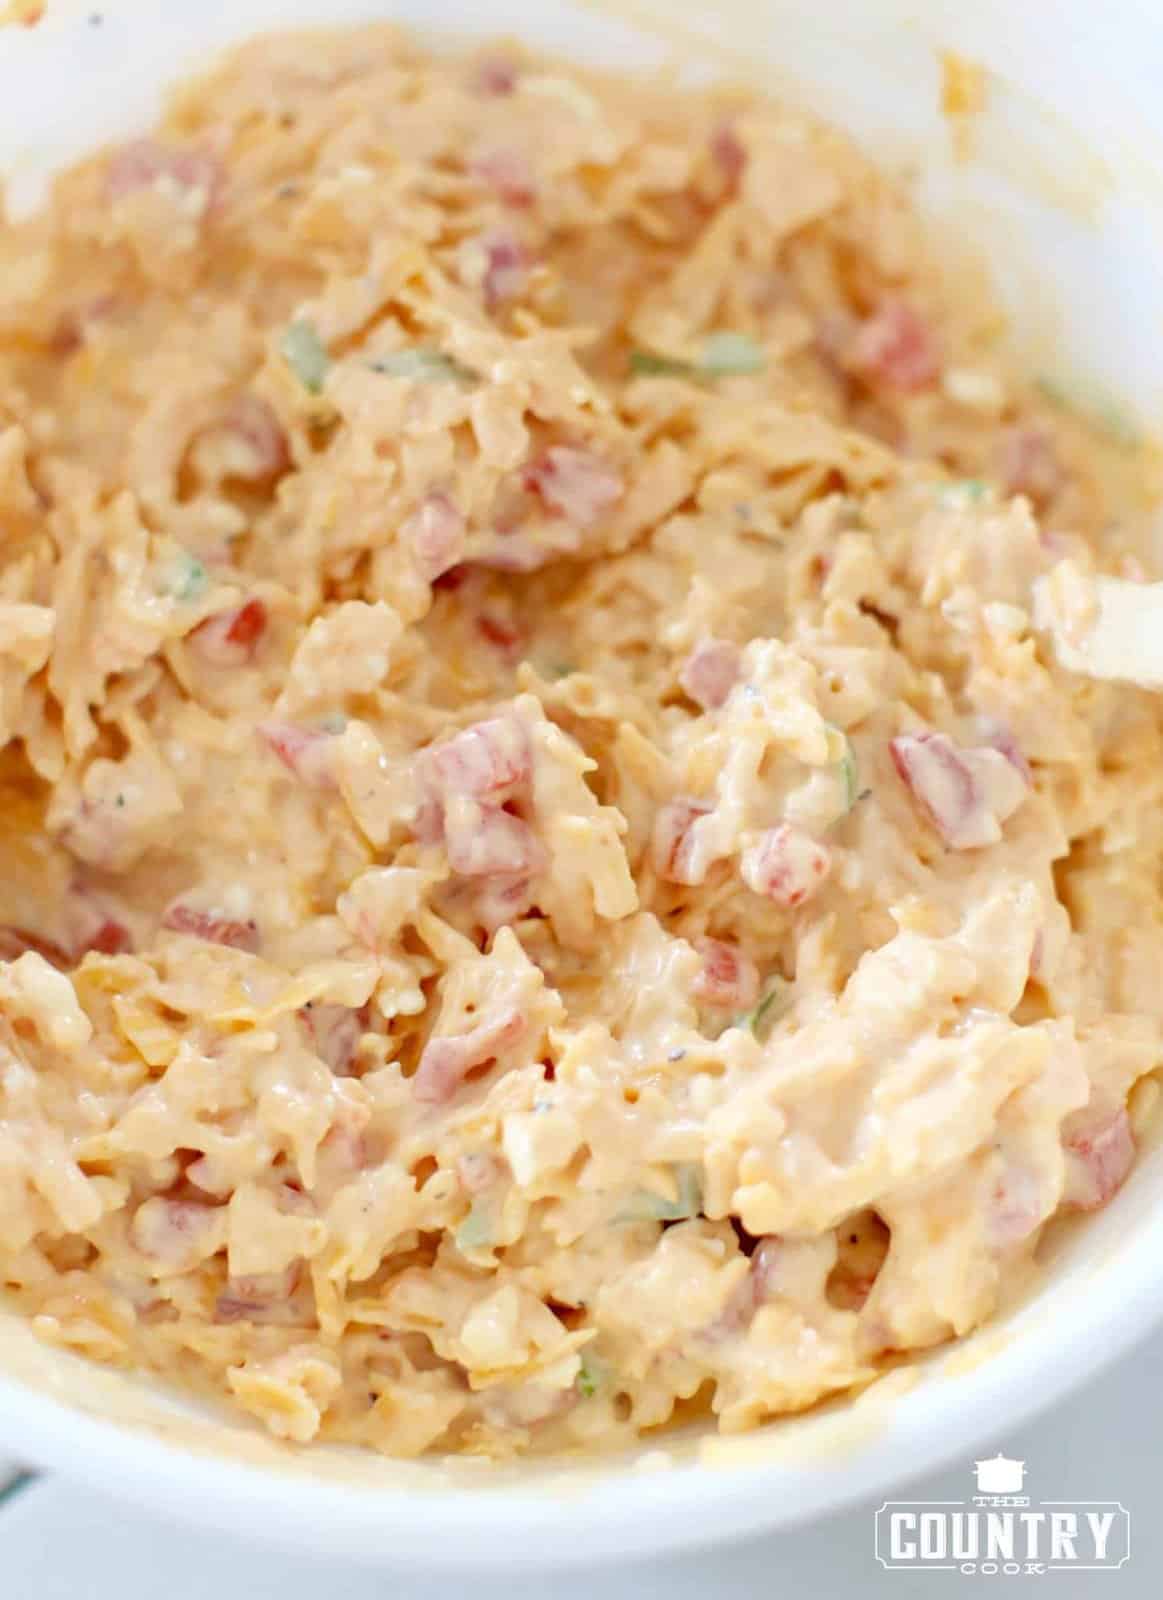 finished pimento cheese shown close up in a bowl.